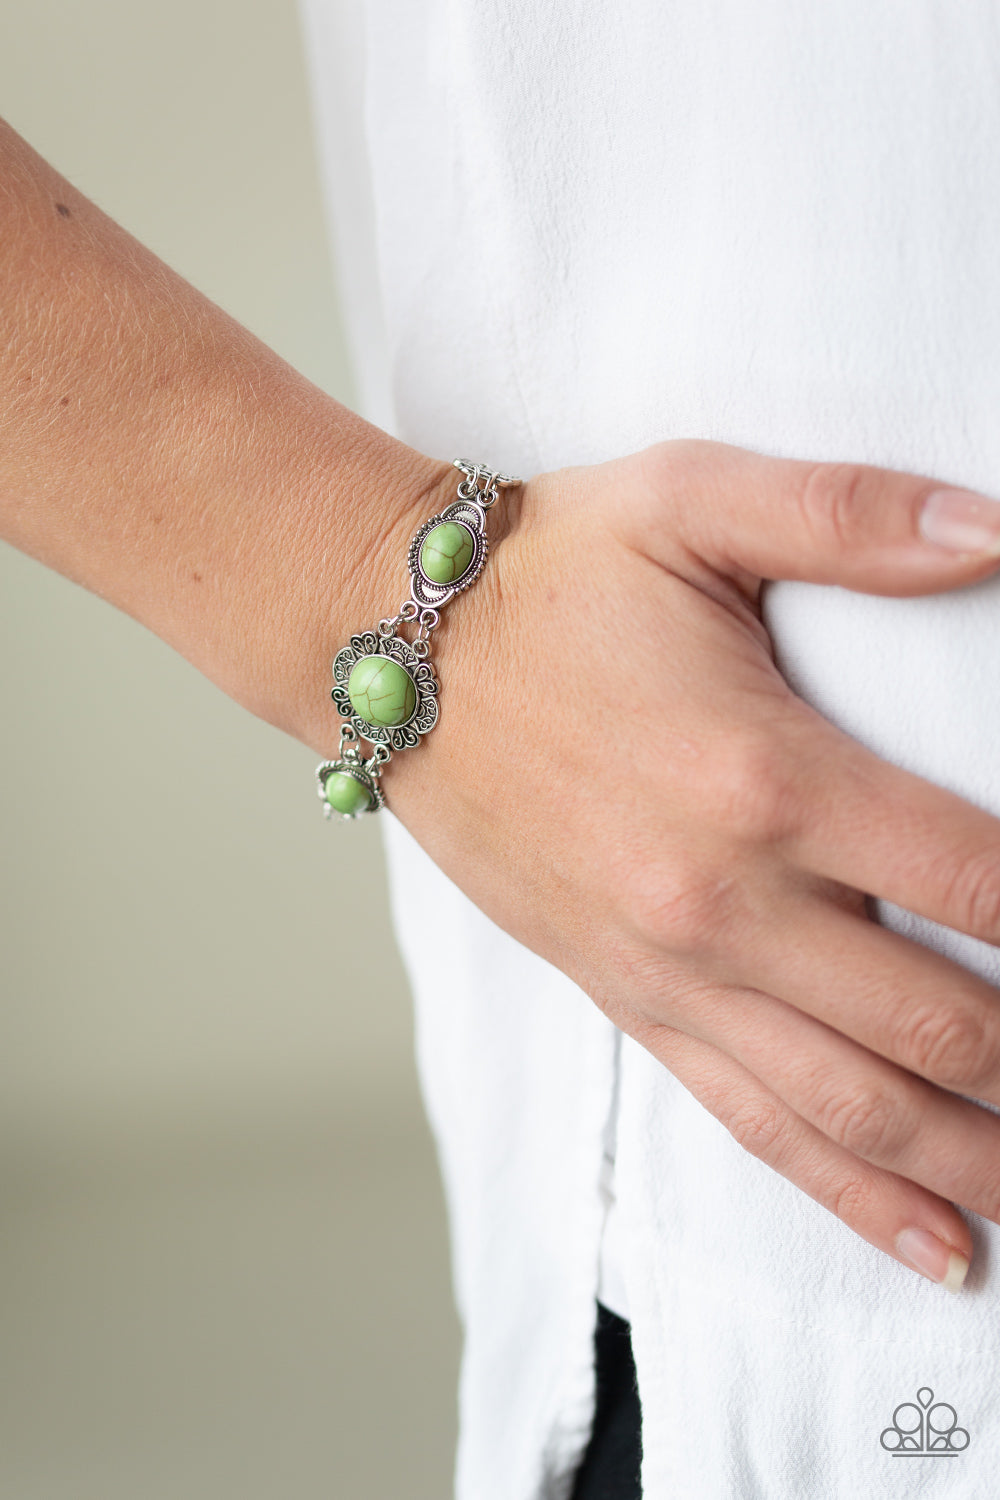 Serenely Southern - Green Paparazzi Jewelry